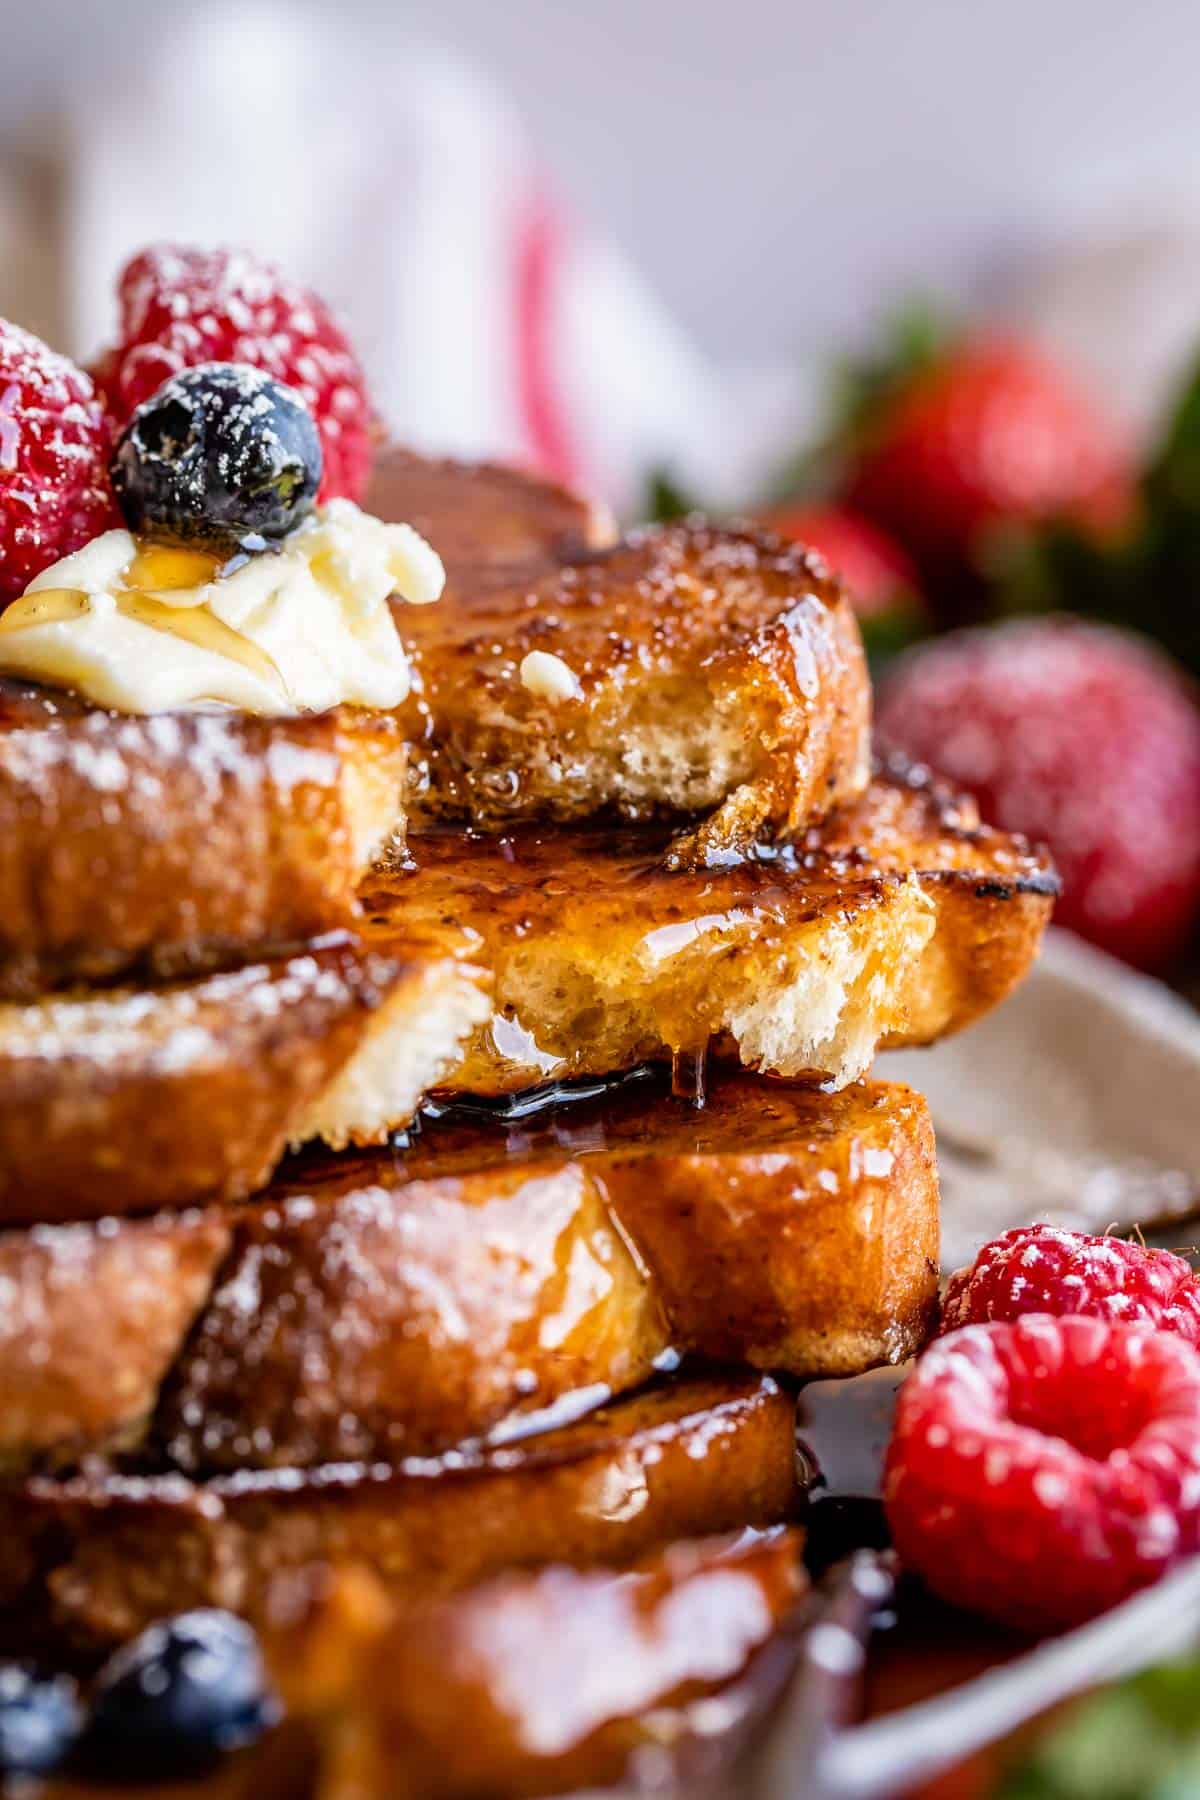 The Best French Toast Recipe I've Ever Made (Caramelized ...